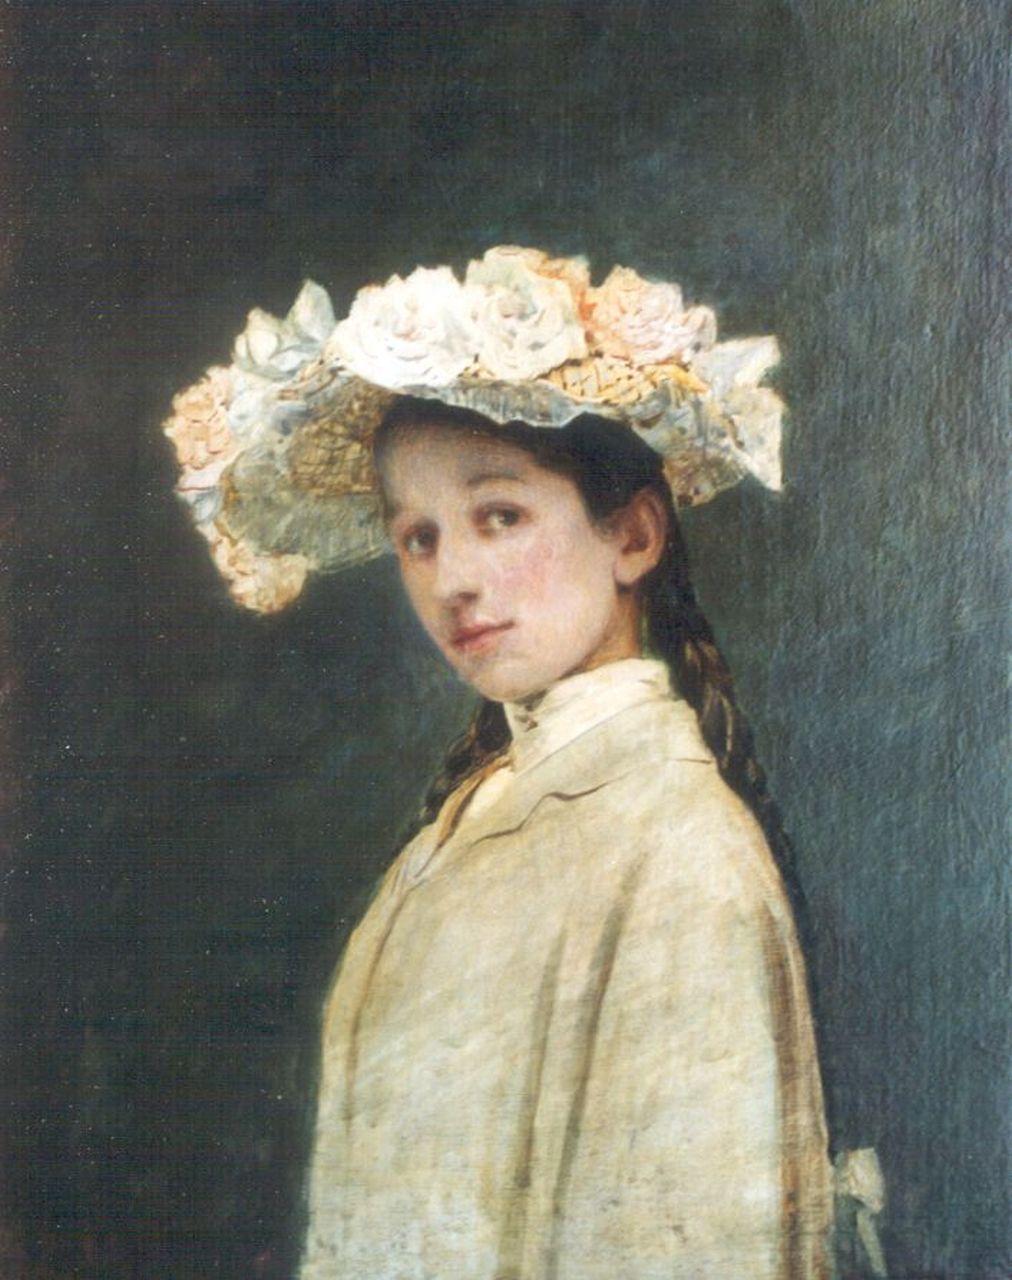 Bettinger G.P.M.  | 'Gustave' Paul Marie Bettinger, Portrait of Mrs. S.E.H.A. Bettinger, the artist's daughter, oil on panel 27.2 x 21.9 cm, signed c.l. and dated 1905